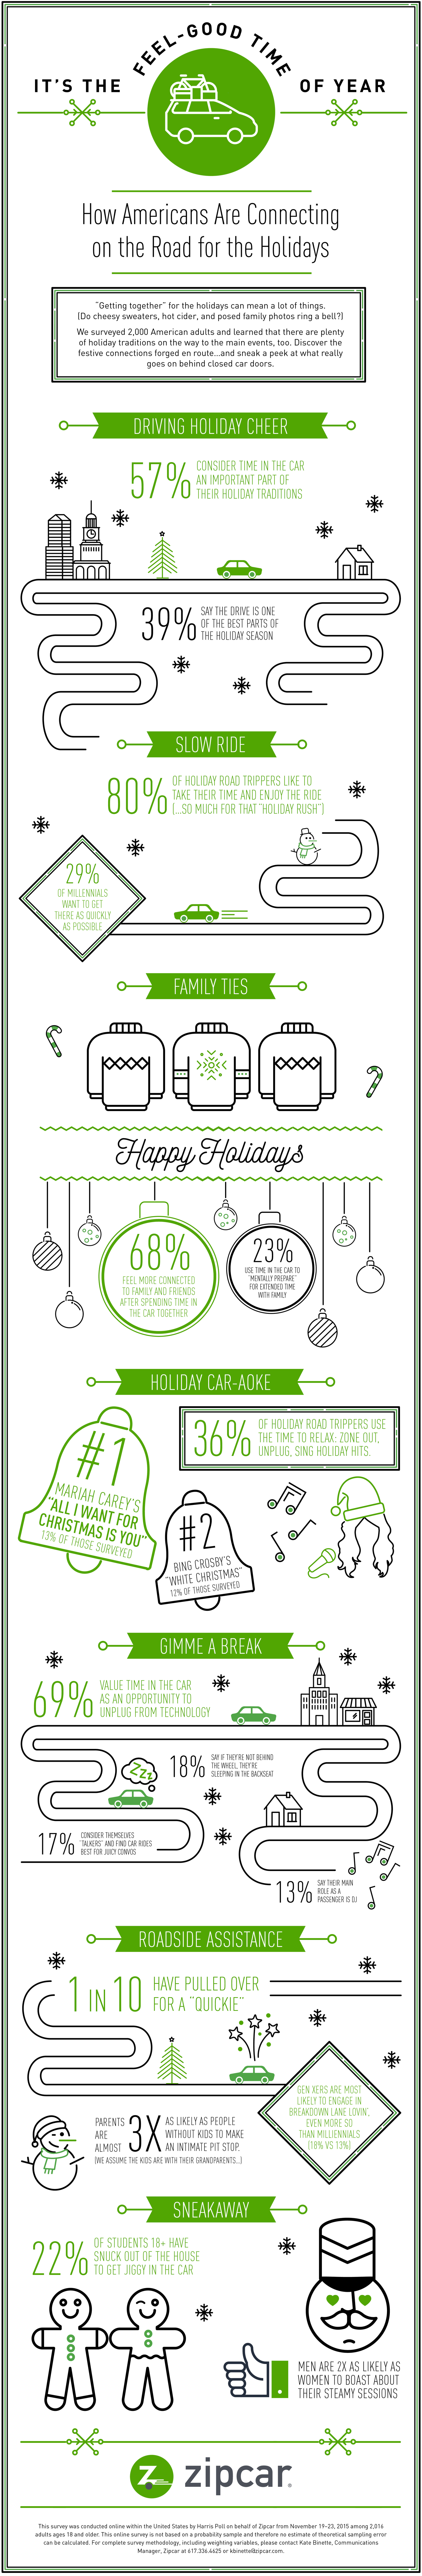 Holiday-Travel-Infographic-Final-300.jpg